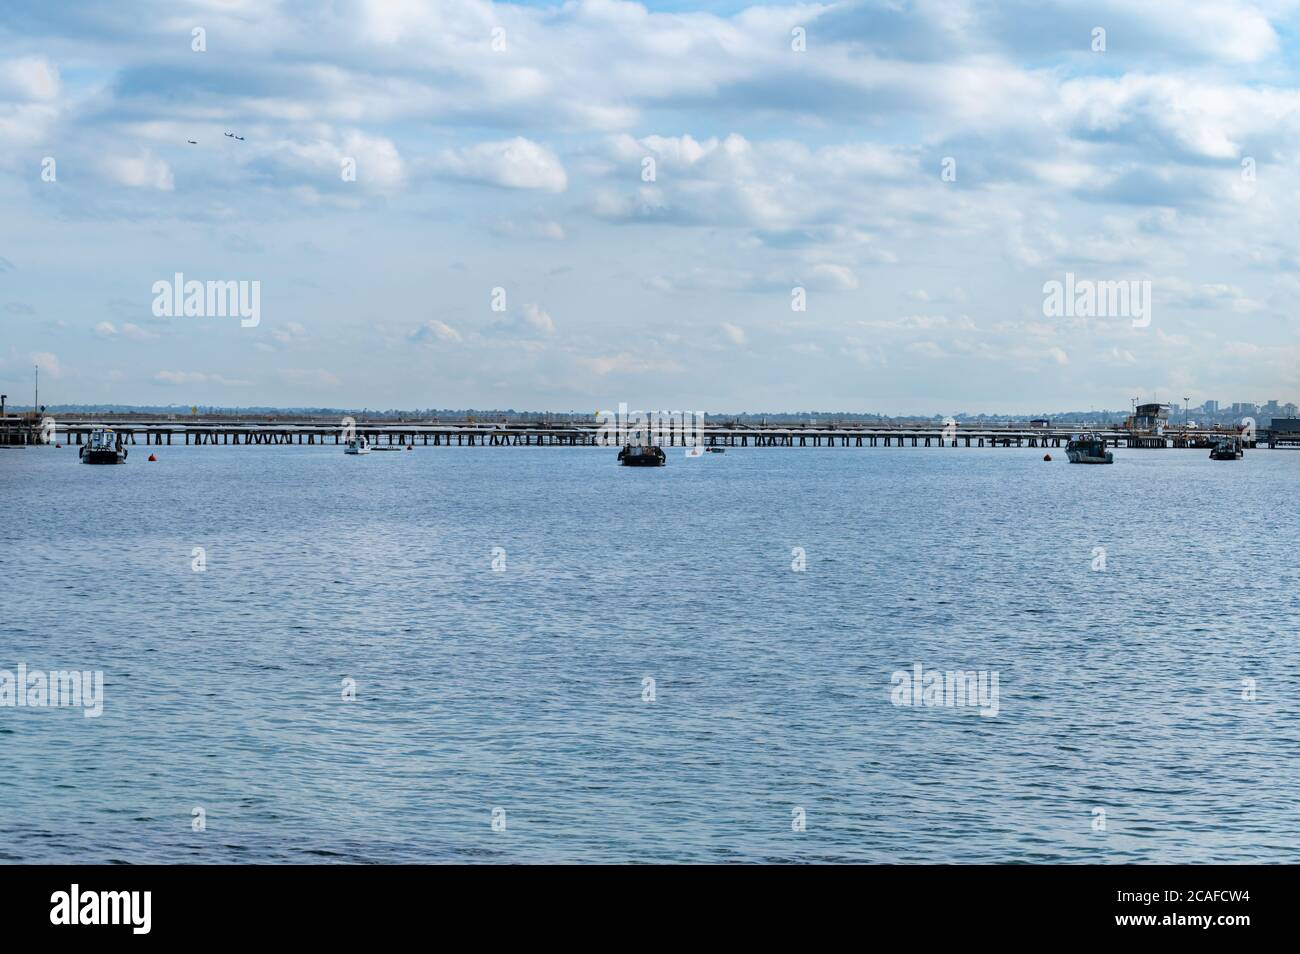 Sydney NSW Australia July 9th 2020 - View of Botany Bay Blue Water and Kurnell Pier on a sunny winter afternoon Stock Photo